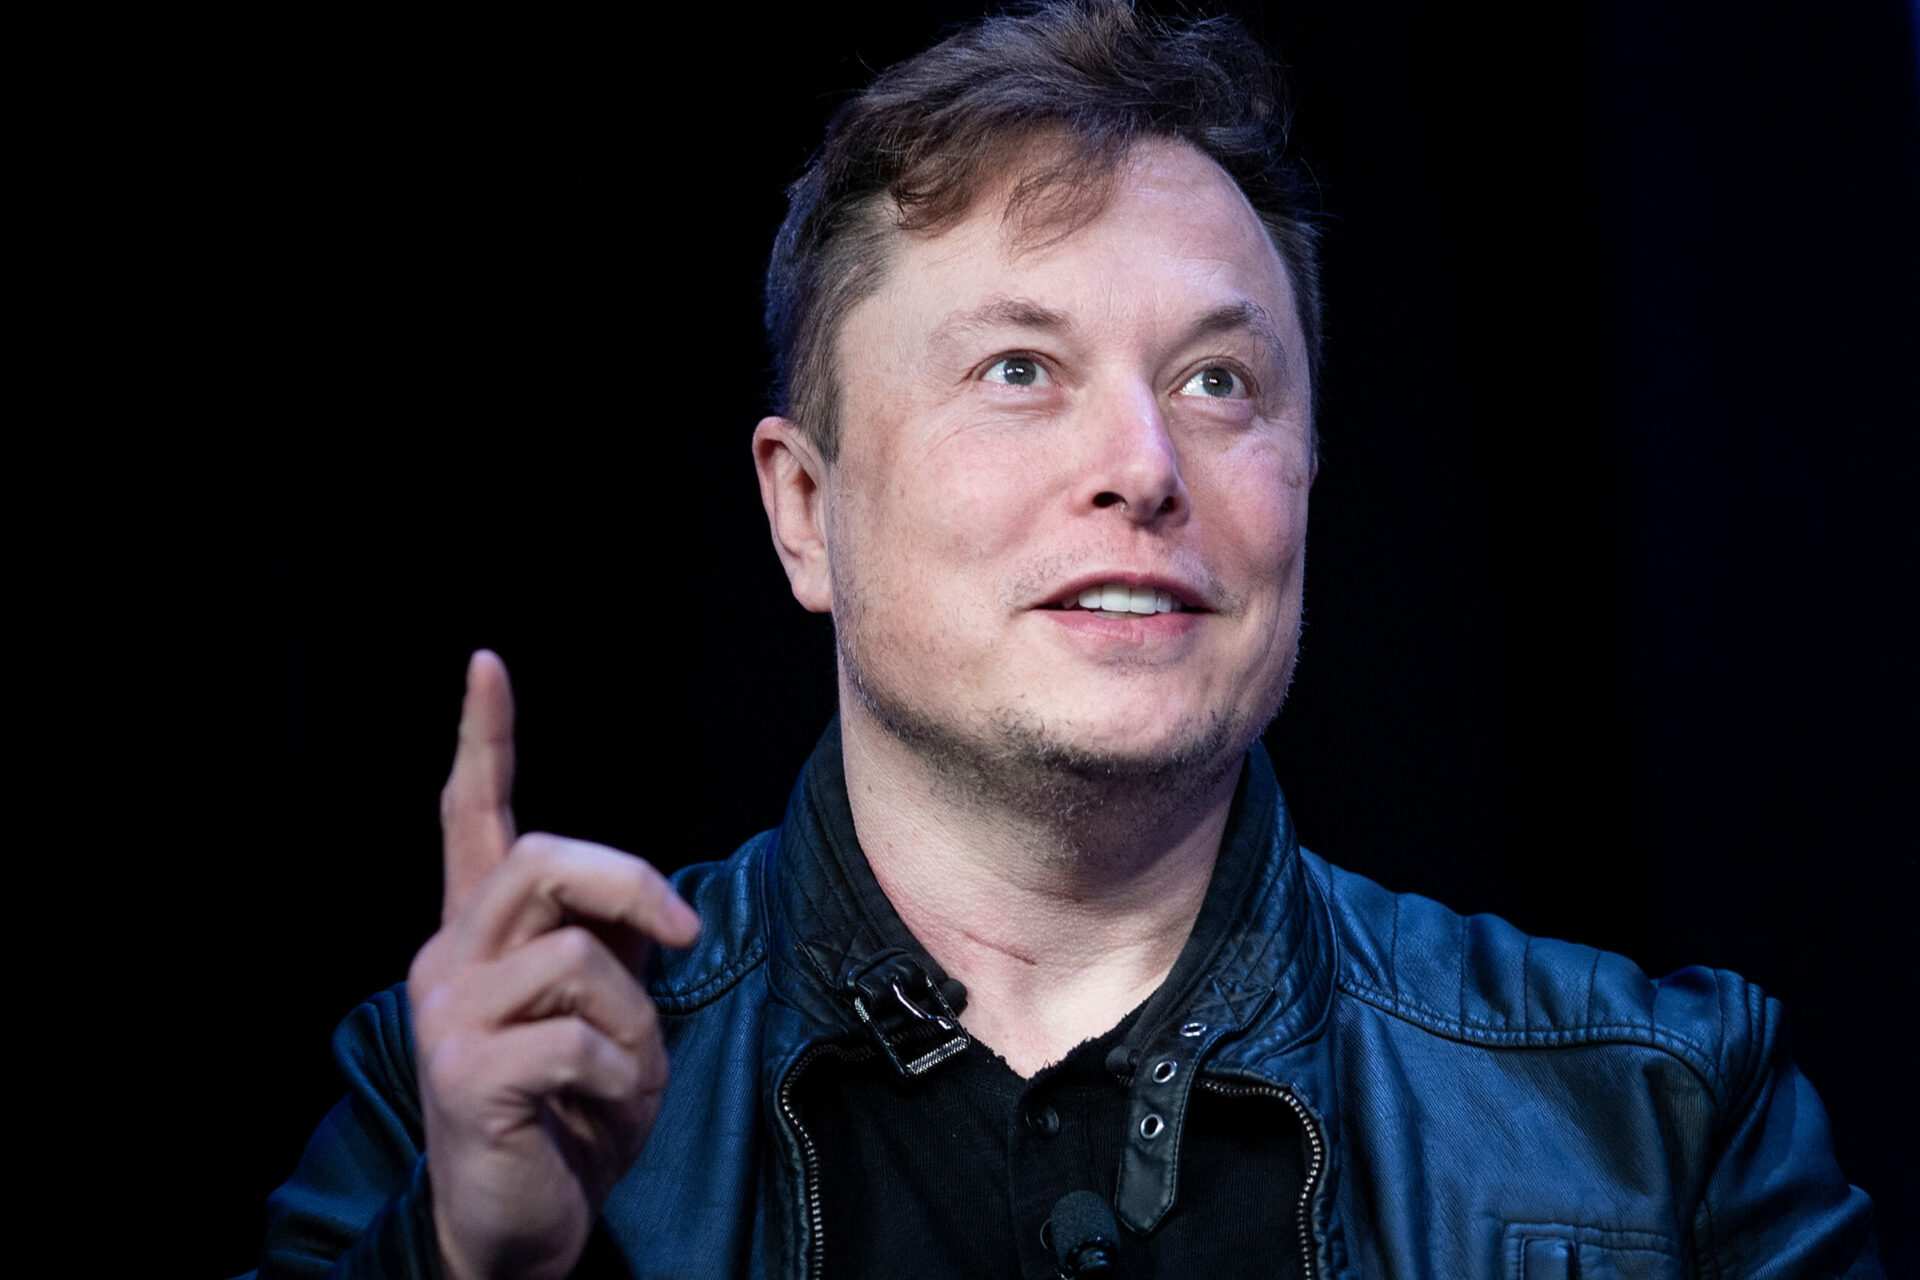 Elon Musk boosted his own tweets; employees now complaining: Report